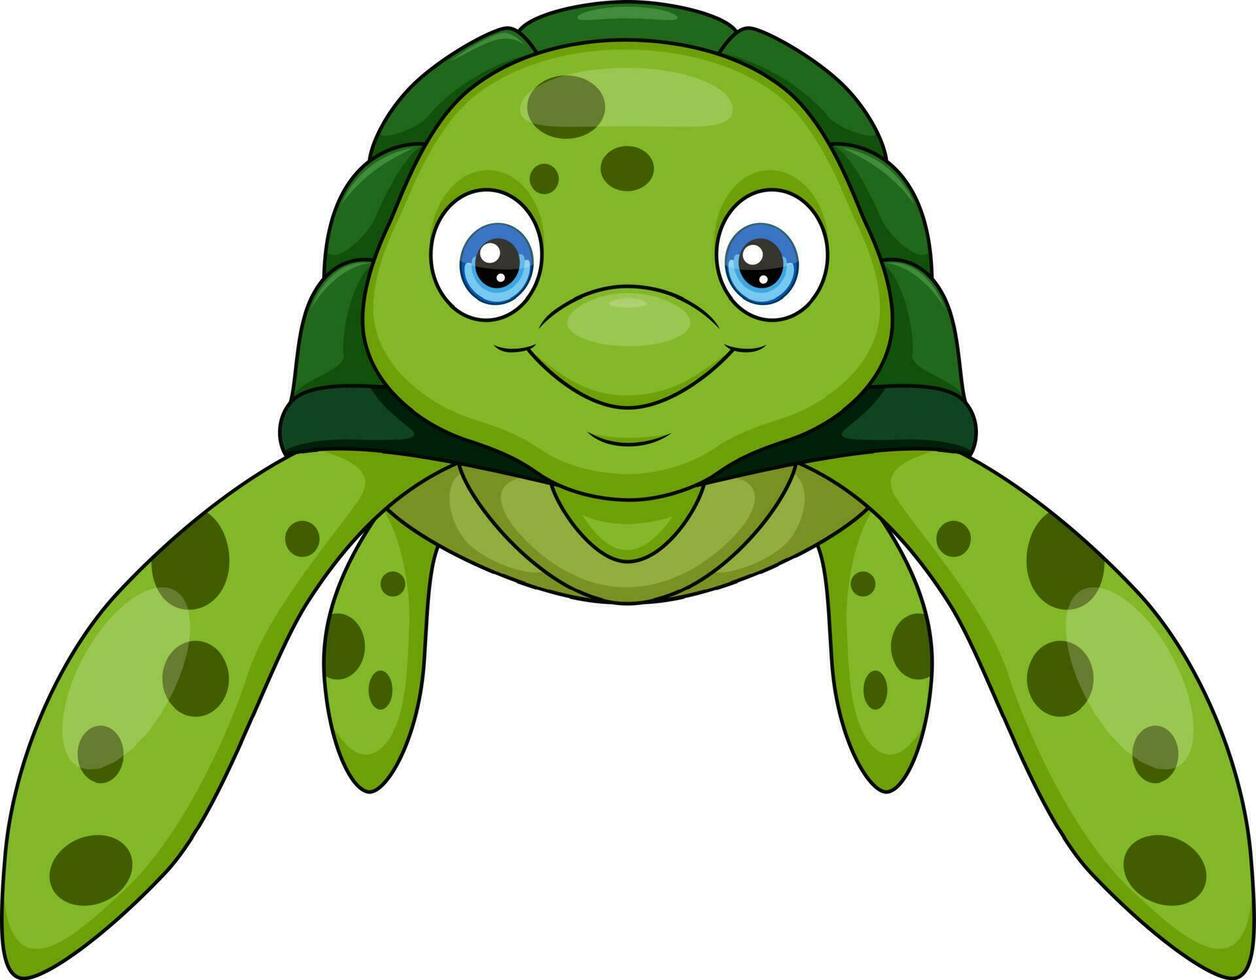 Cute baby turtle cartoon on white background vector